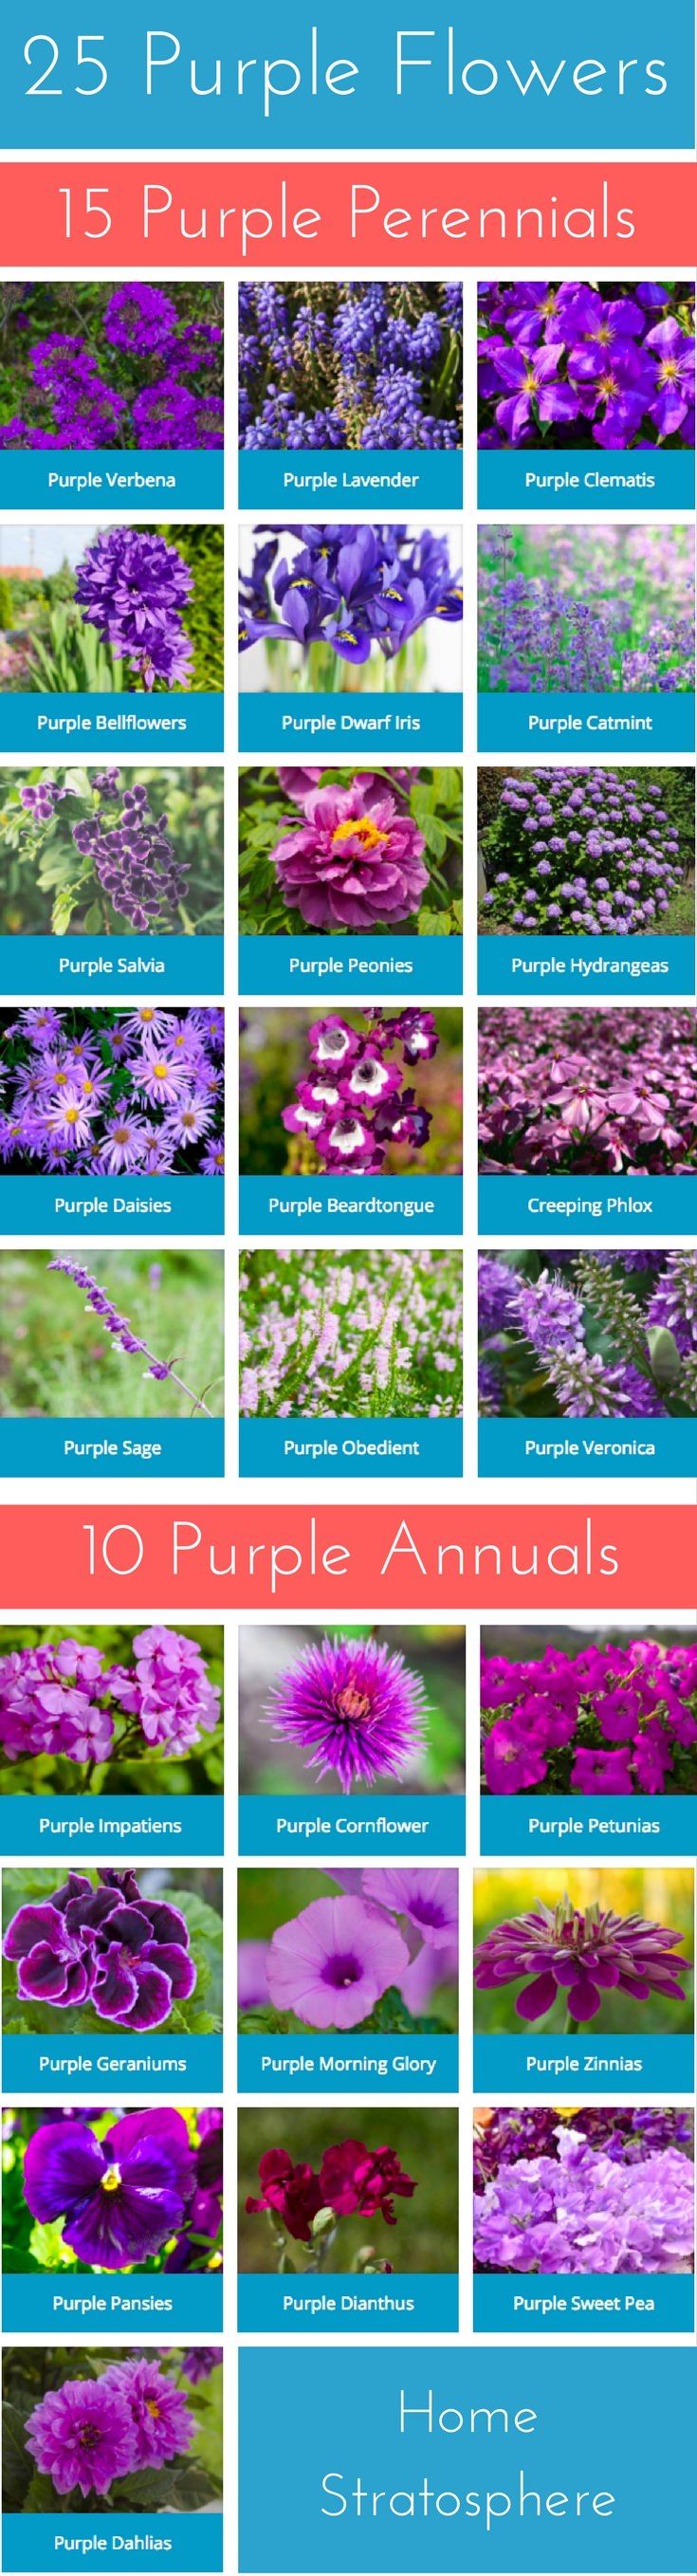 25 Purple Flower Ideas for Your Garden, Pots and Planters | Flower ...